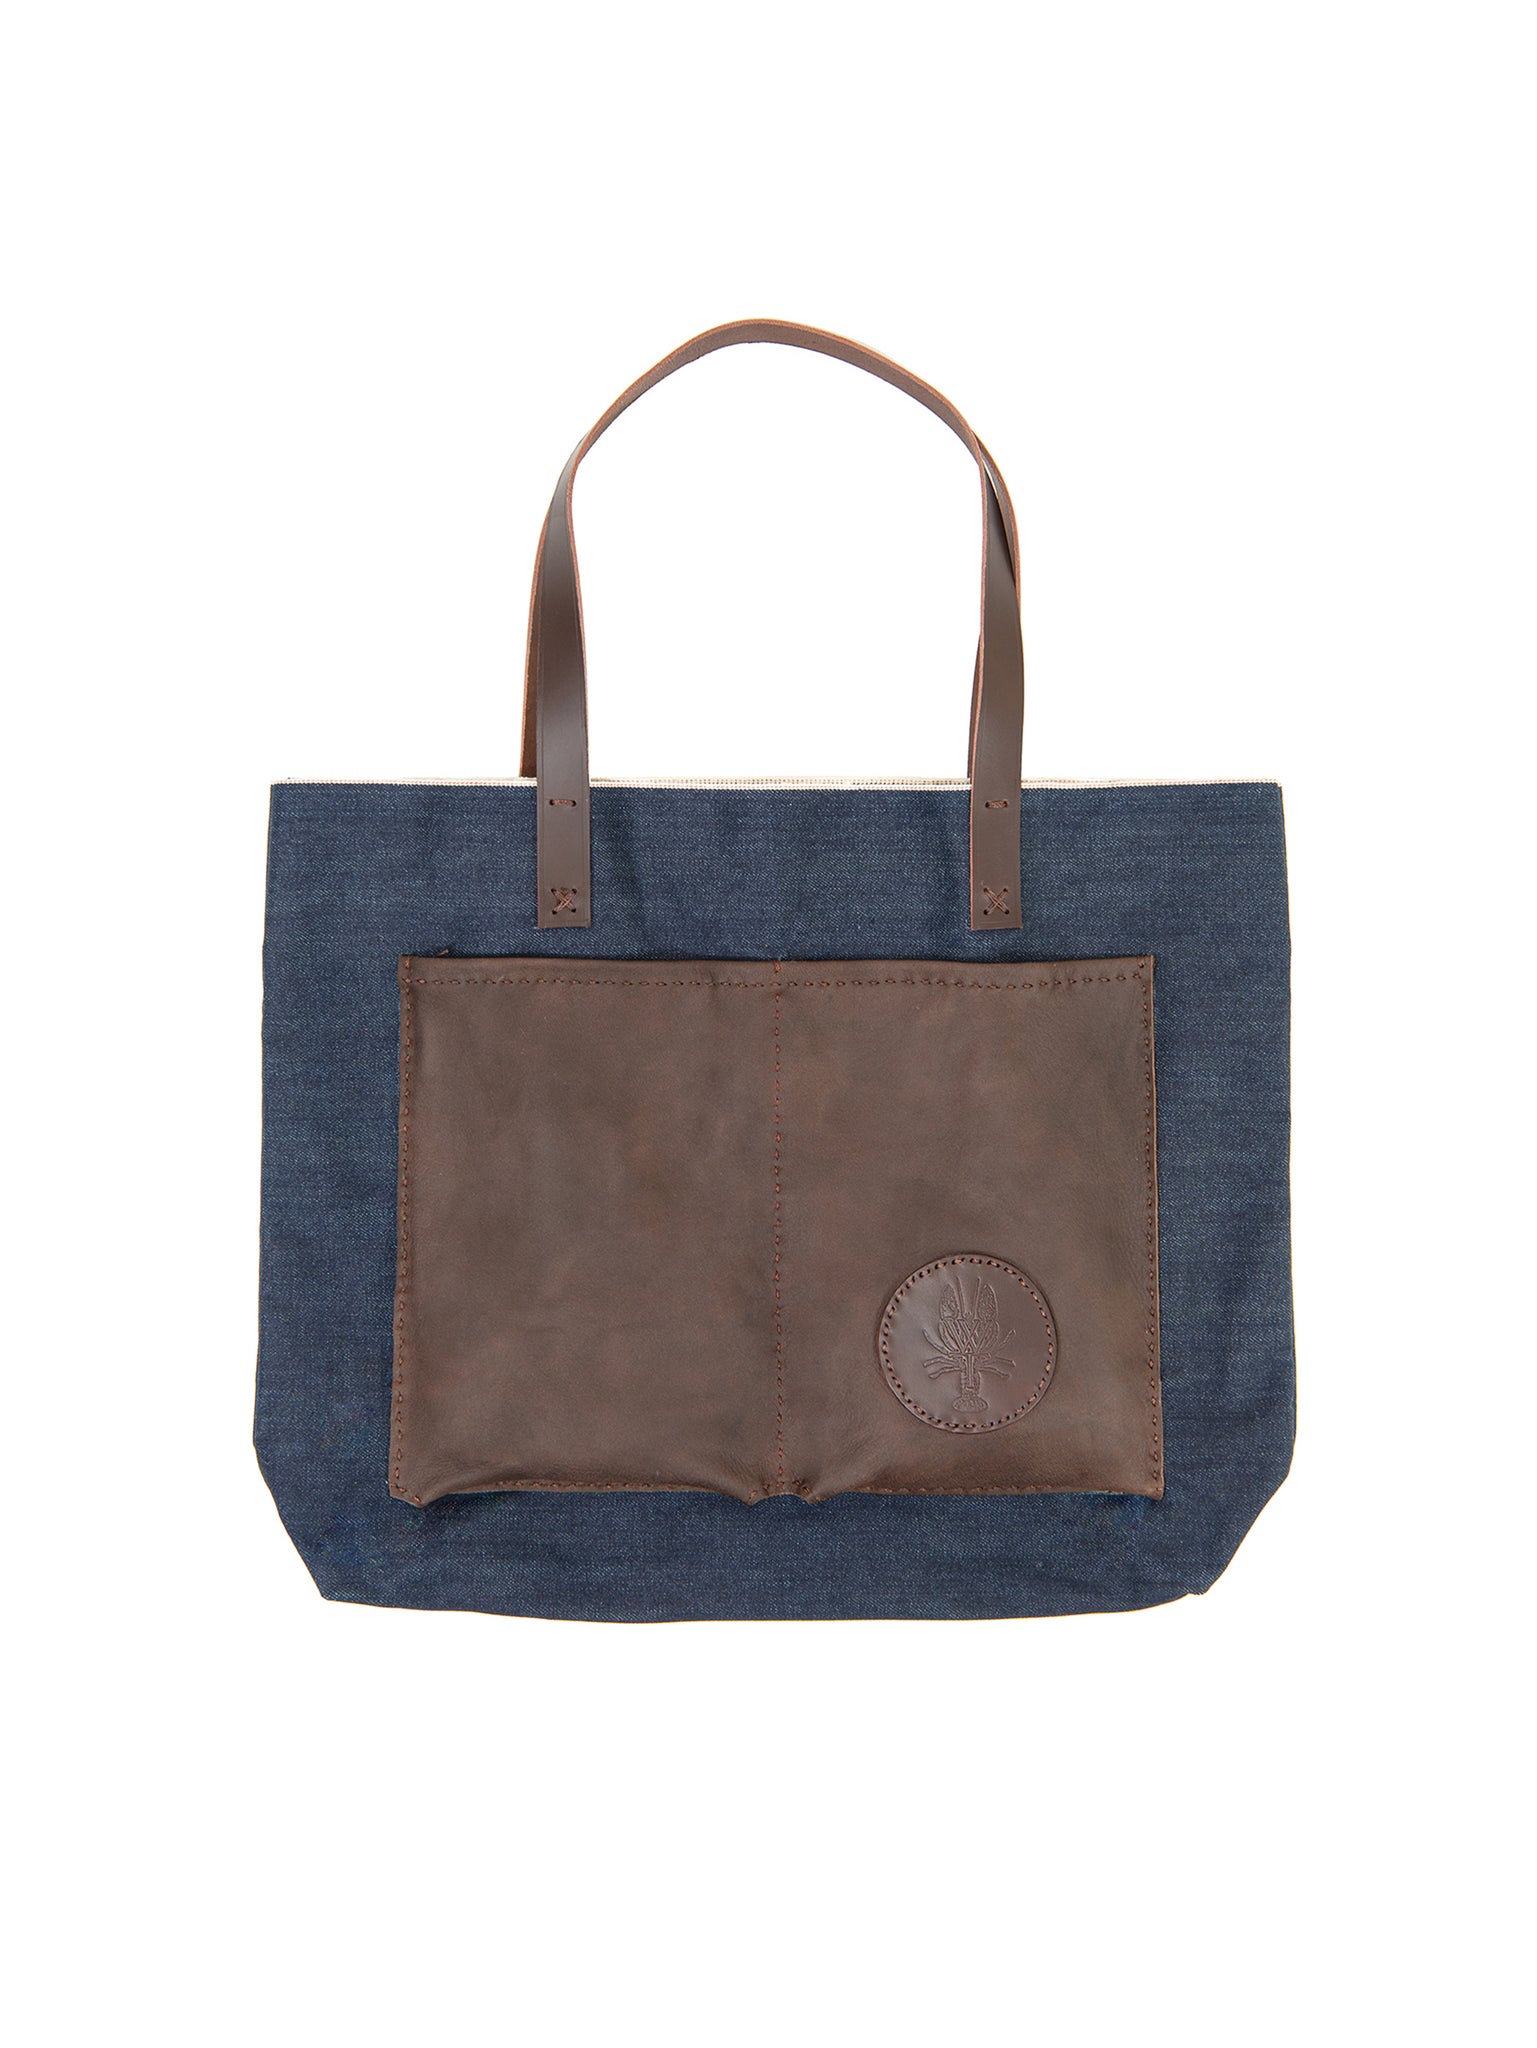 Japanese Selvedge Denim Tote with Leather Pockets Weston Table